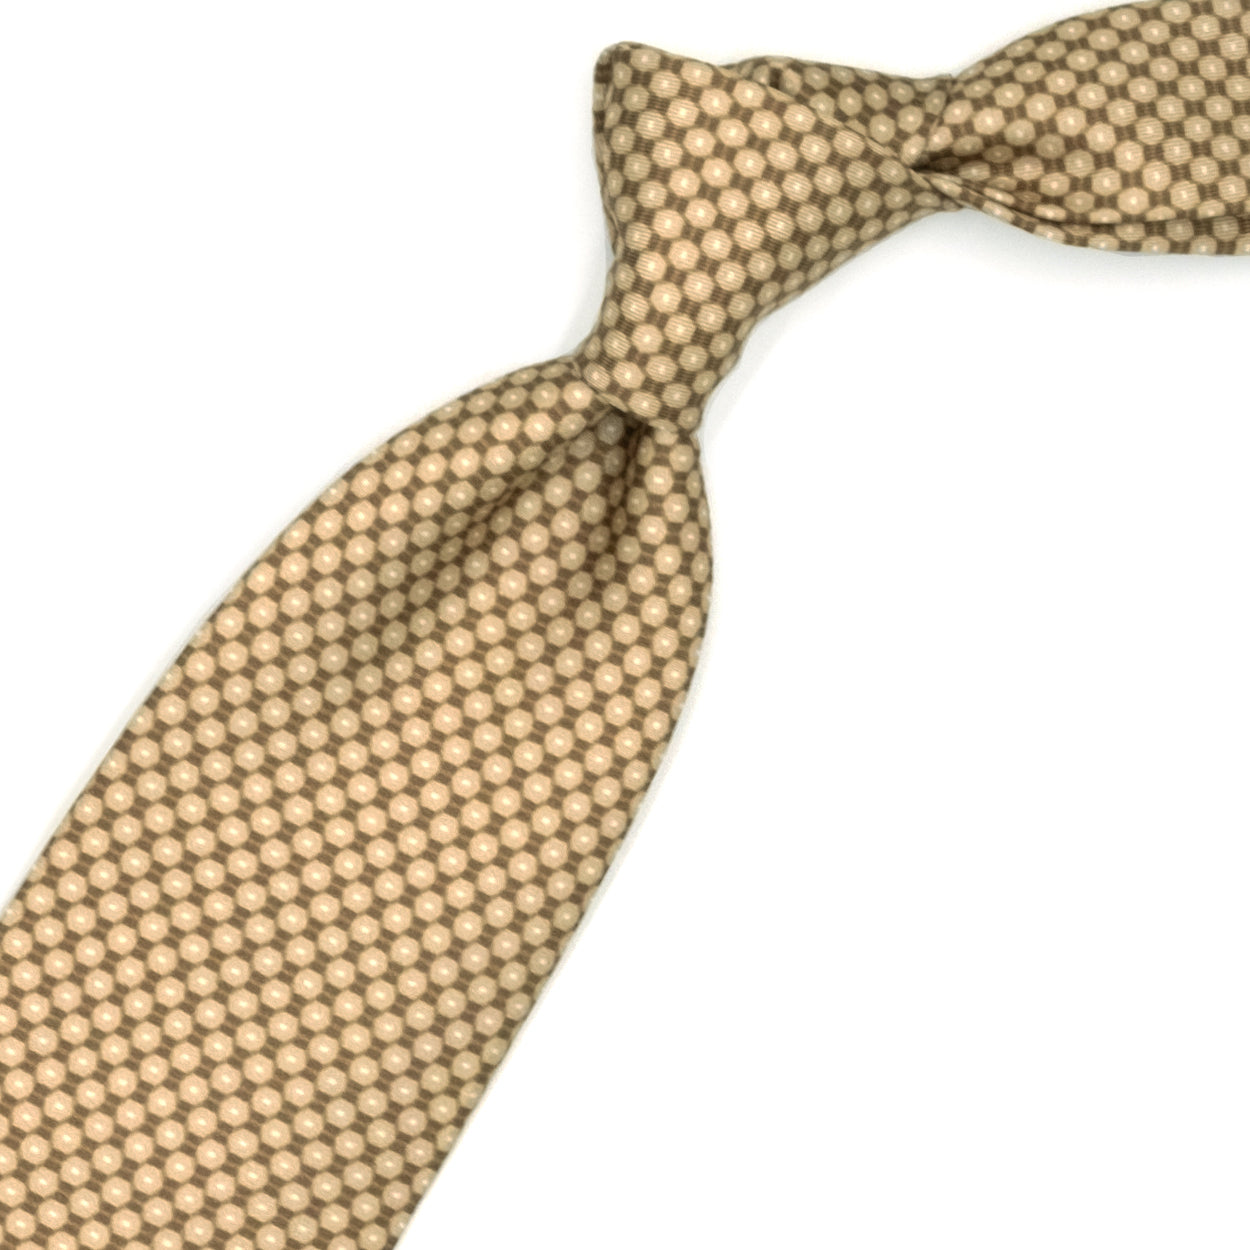 Tie with yellow and brown geometric pattern